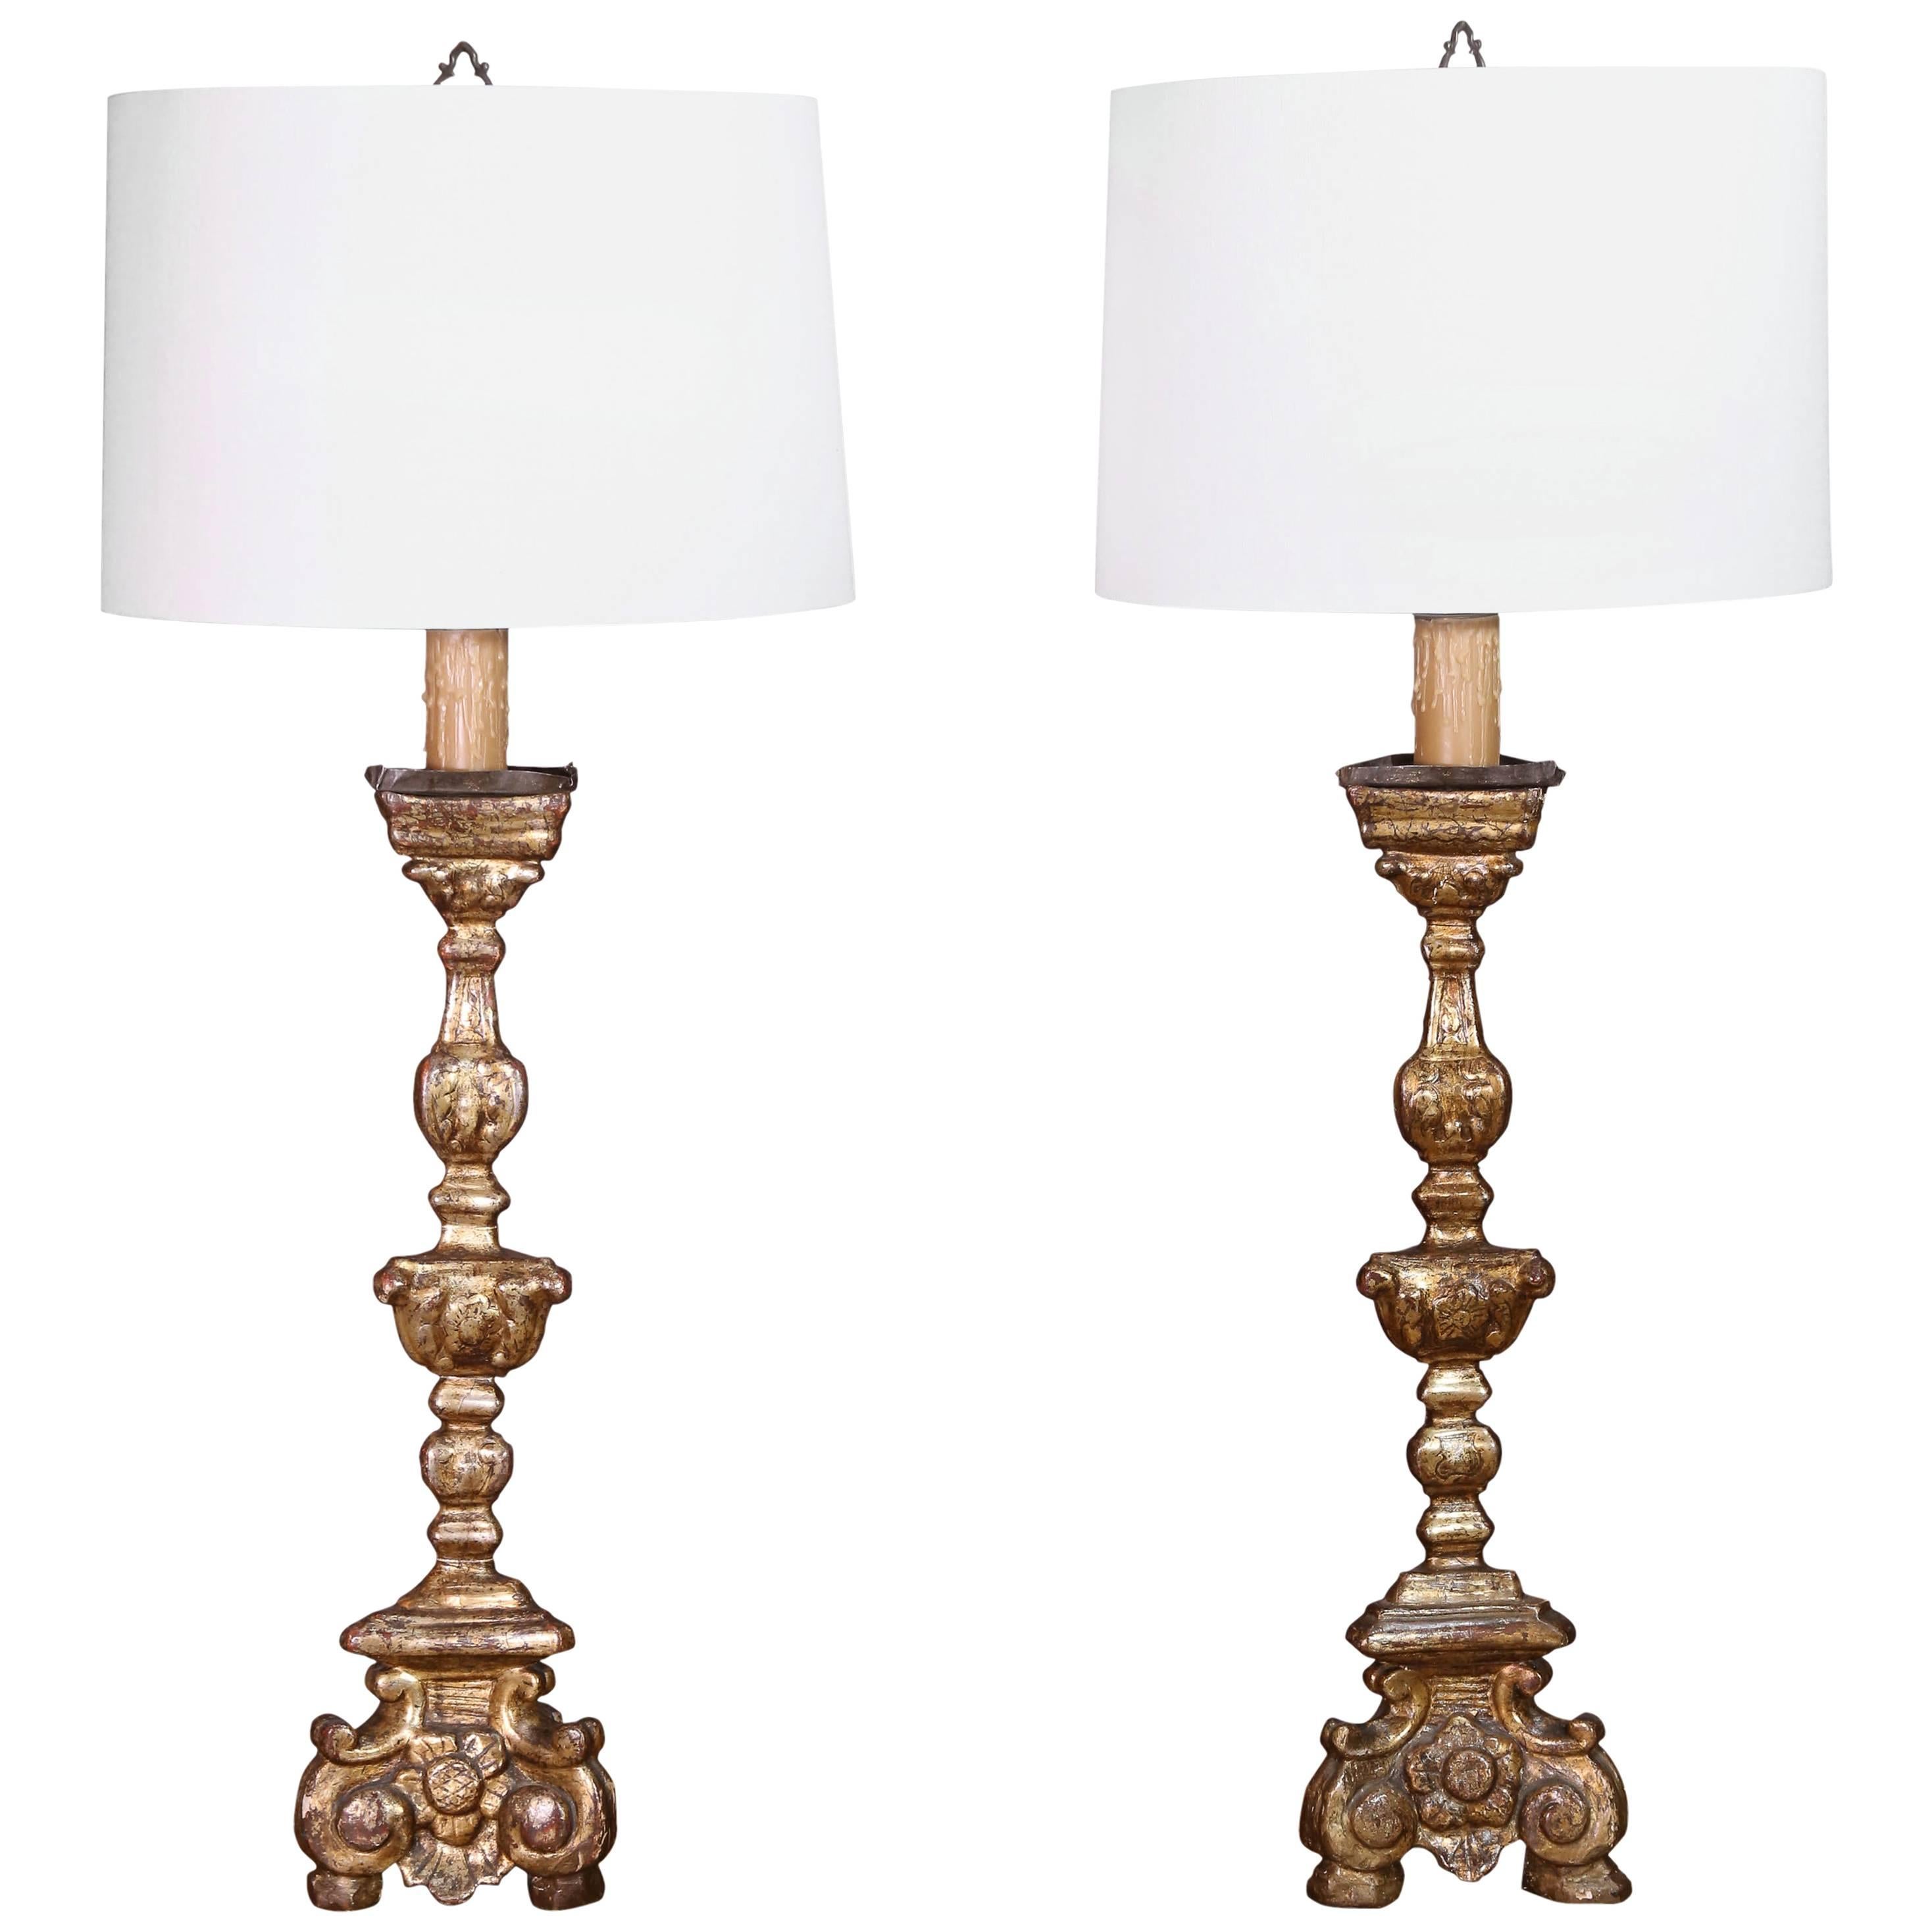 Pair of Late 18th Century Baroque Altar Candlesticks Made into Lamps